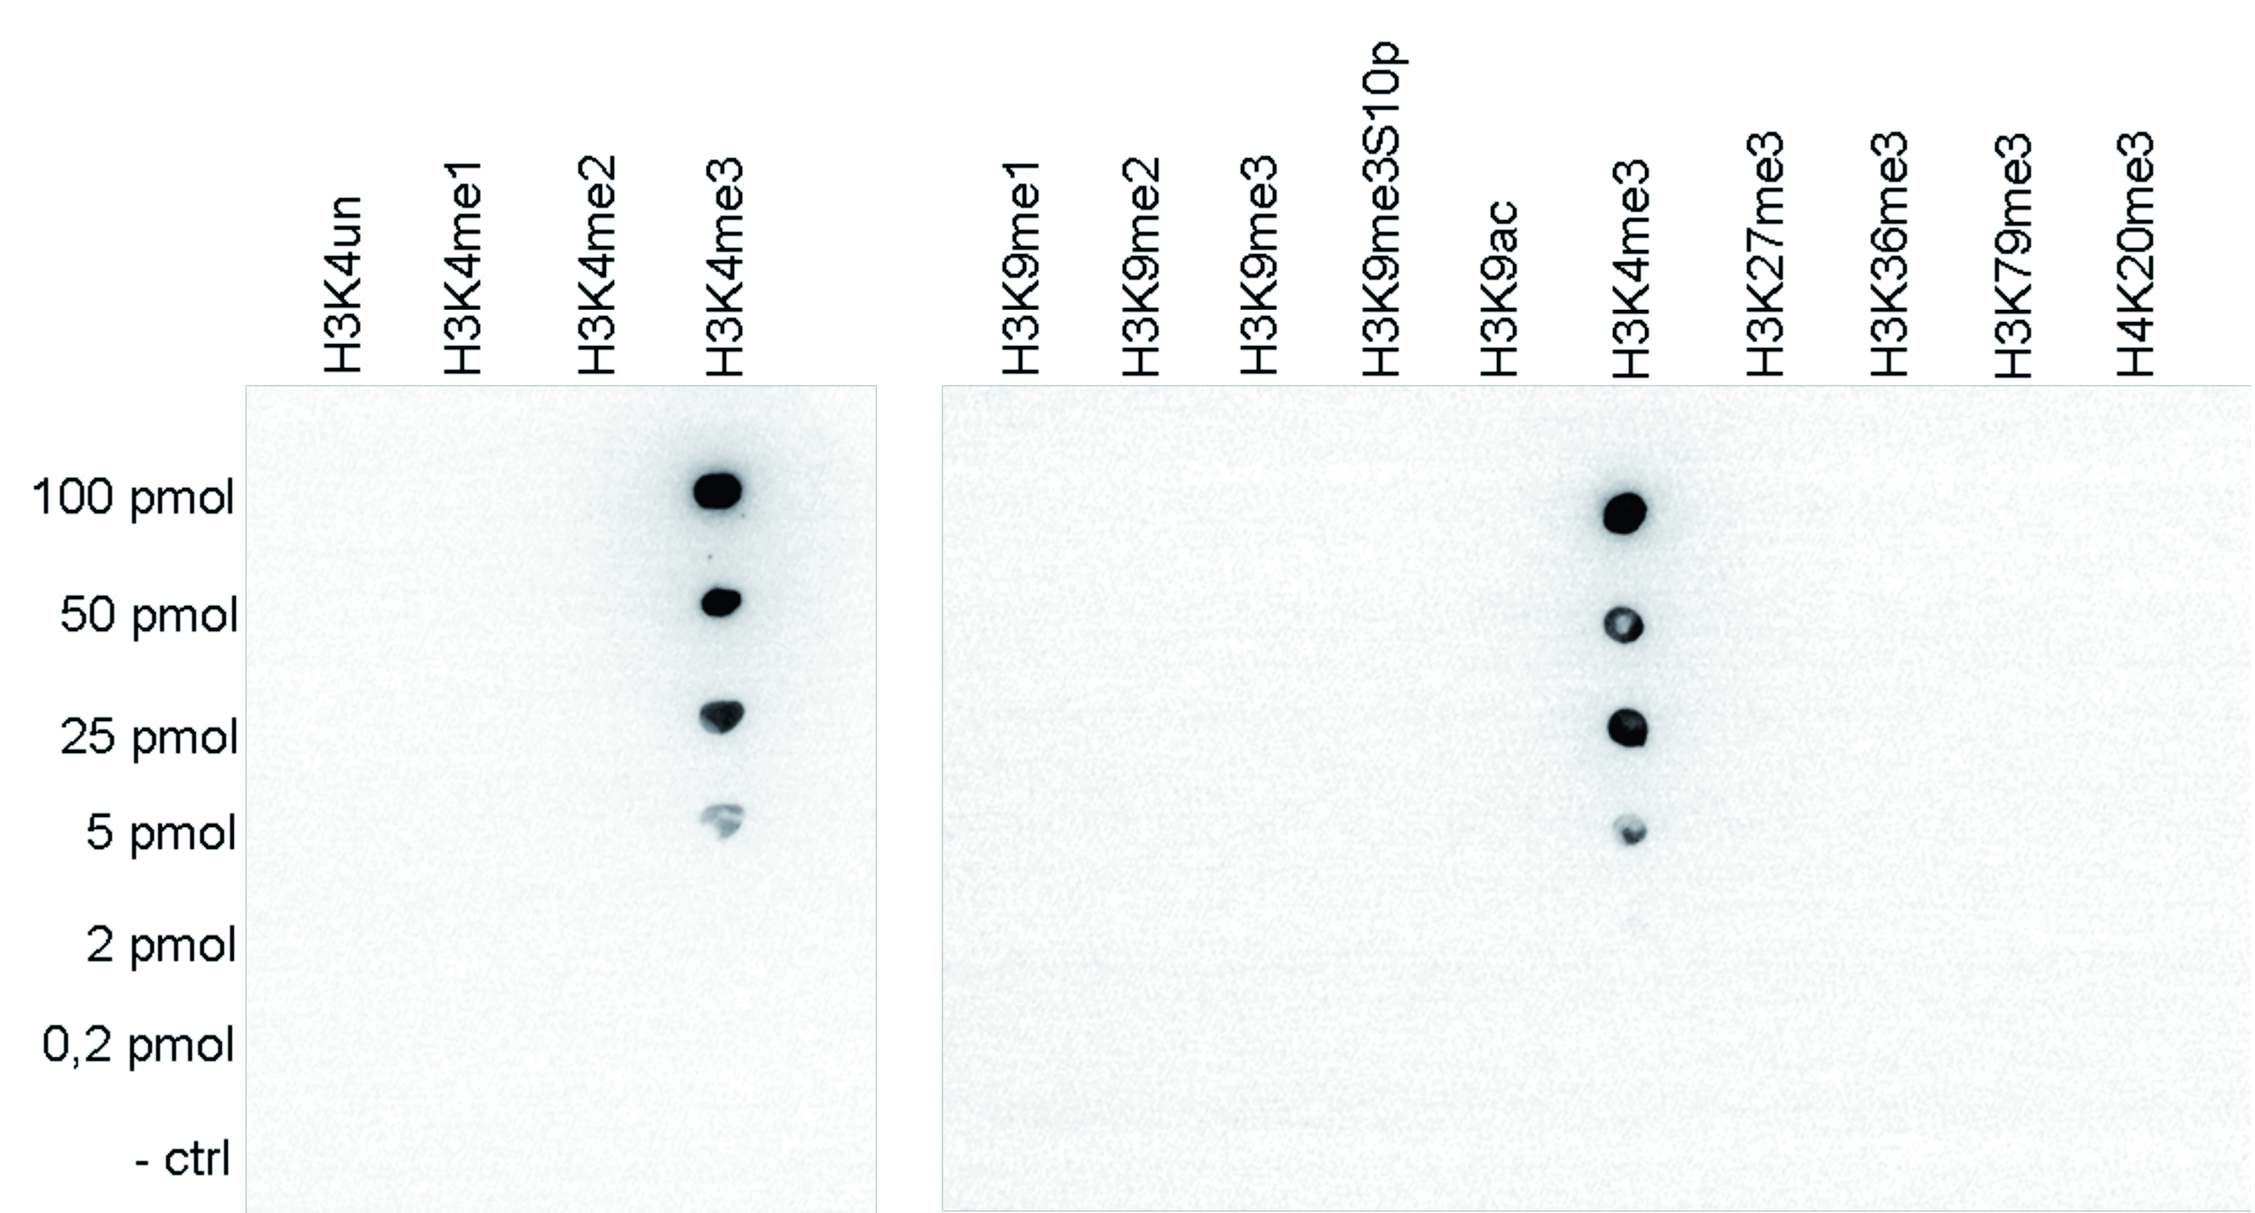 A Dot Blot analysis was performed to test the cross-reactivity of the Bioss antibody against H3K4me3 (Cat. No. bs-53103R) with peptides containing other modifications and unmodified sequences of histone H3 and H4. One hundred to 0.2 pmol of the respective peptides were spotted on a membrane. The antibody was used at a dilution of 1:2,000. The figure shows a high specificity of the antibody for the modification of interest.